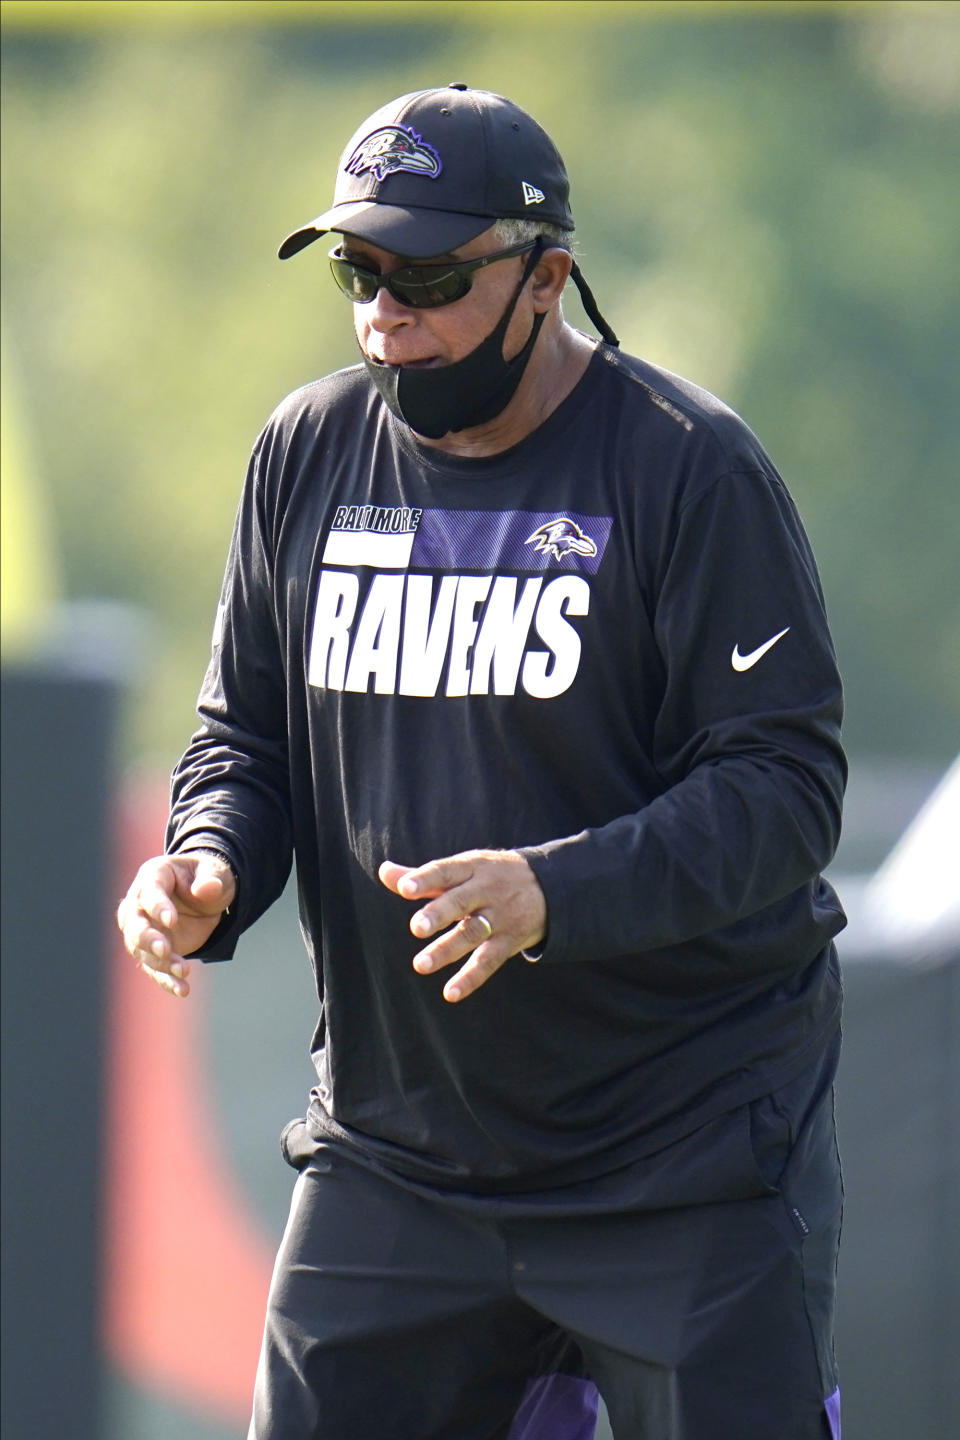 FILE - Baltimore Ravens assistant head coach David Culley works with wide receivers during an NFL football training camp practice in Owings Mills, Md., in this Tuesday, Aug. 25, 2020, file photo. David Culley has been hired as the coach of the Houston Texans, a person familiar with the hiring told The Associated Press. The person spoke to the AP on condition of anonymity Wednesday night, Jan. 27, 2021, because the hiring hasn’t been announced. (AP Photo/Julio Cortez, File)